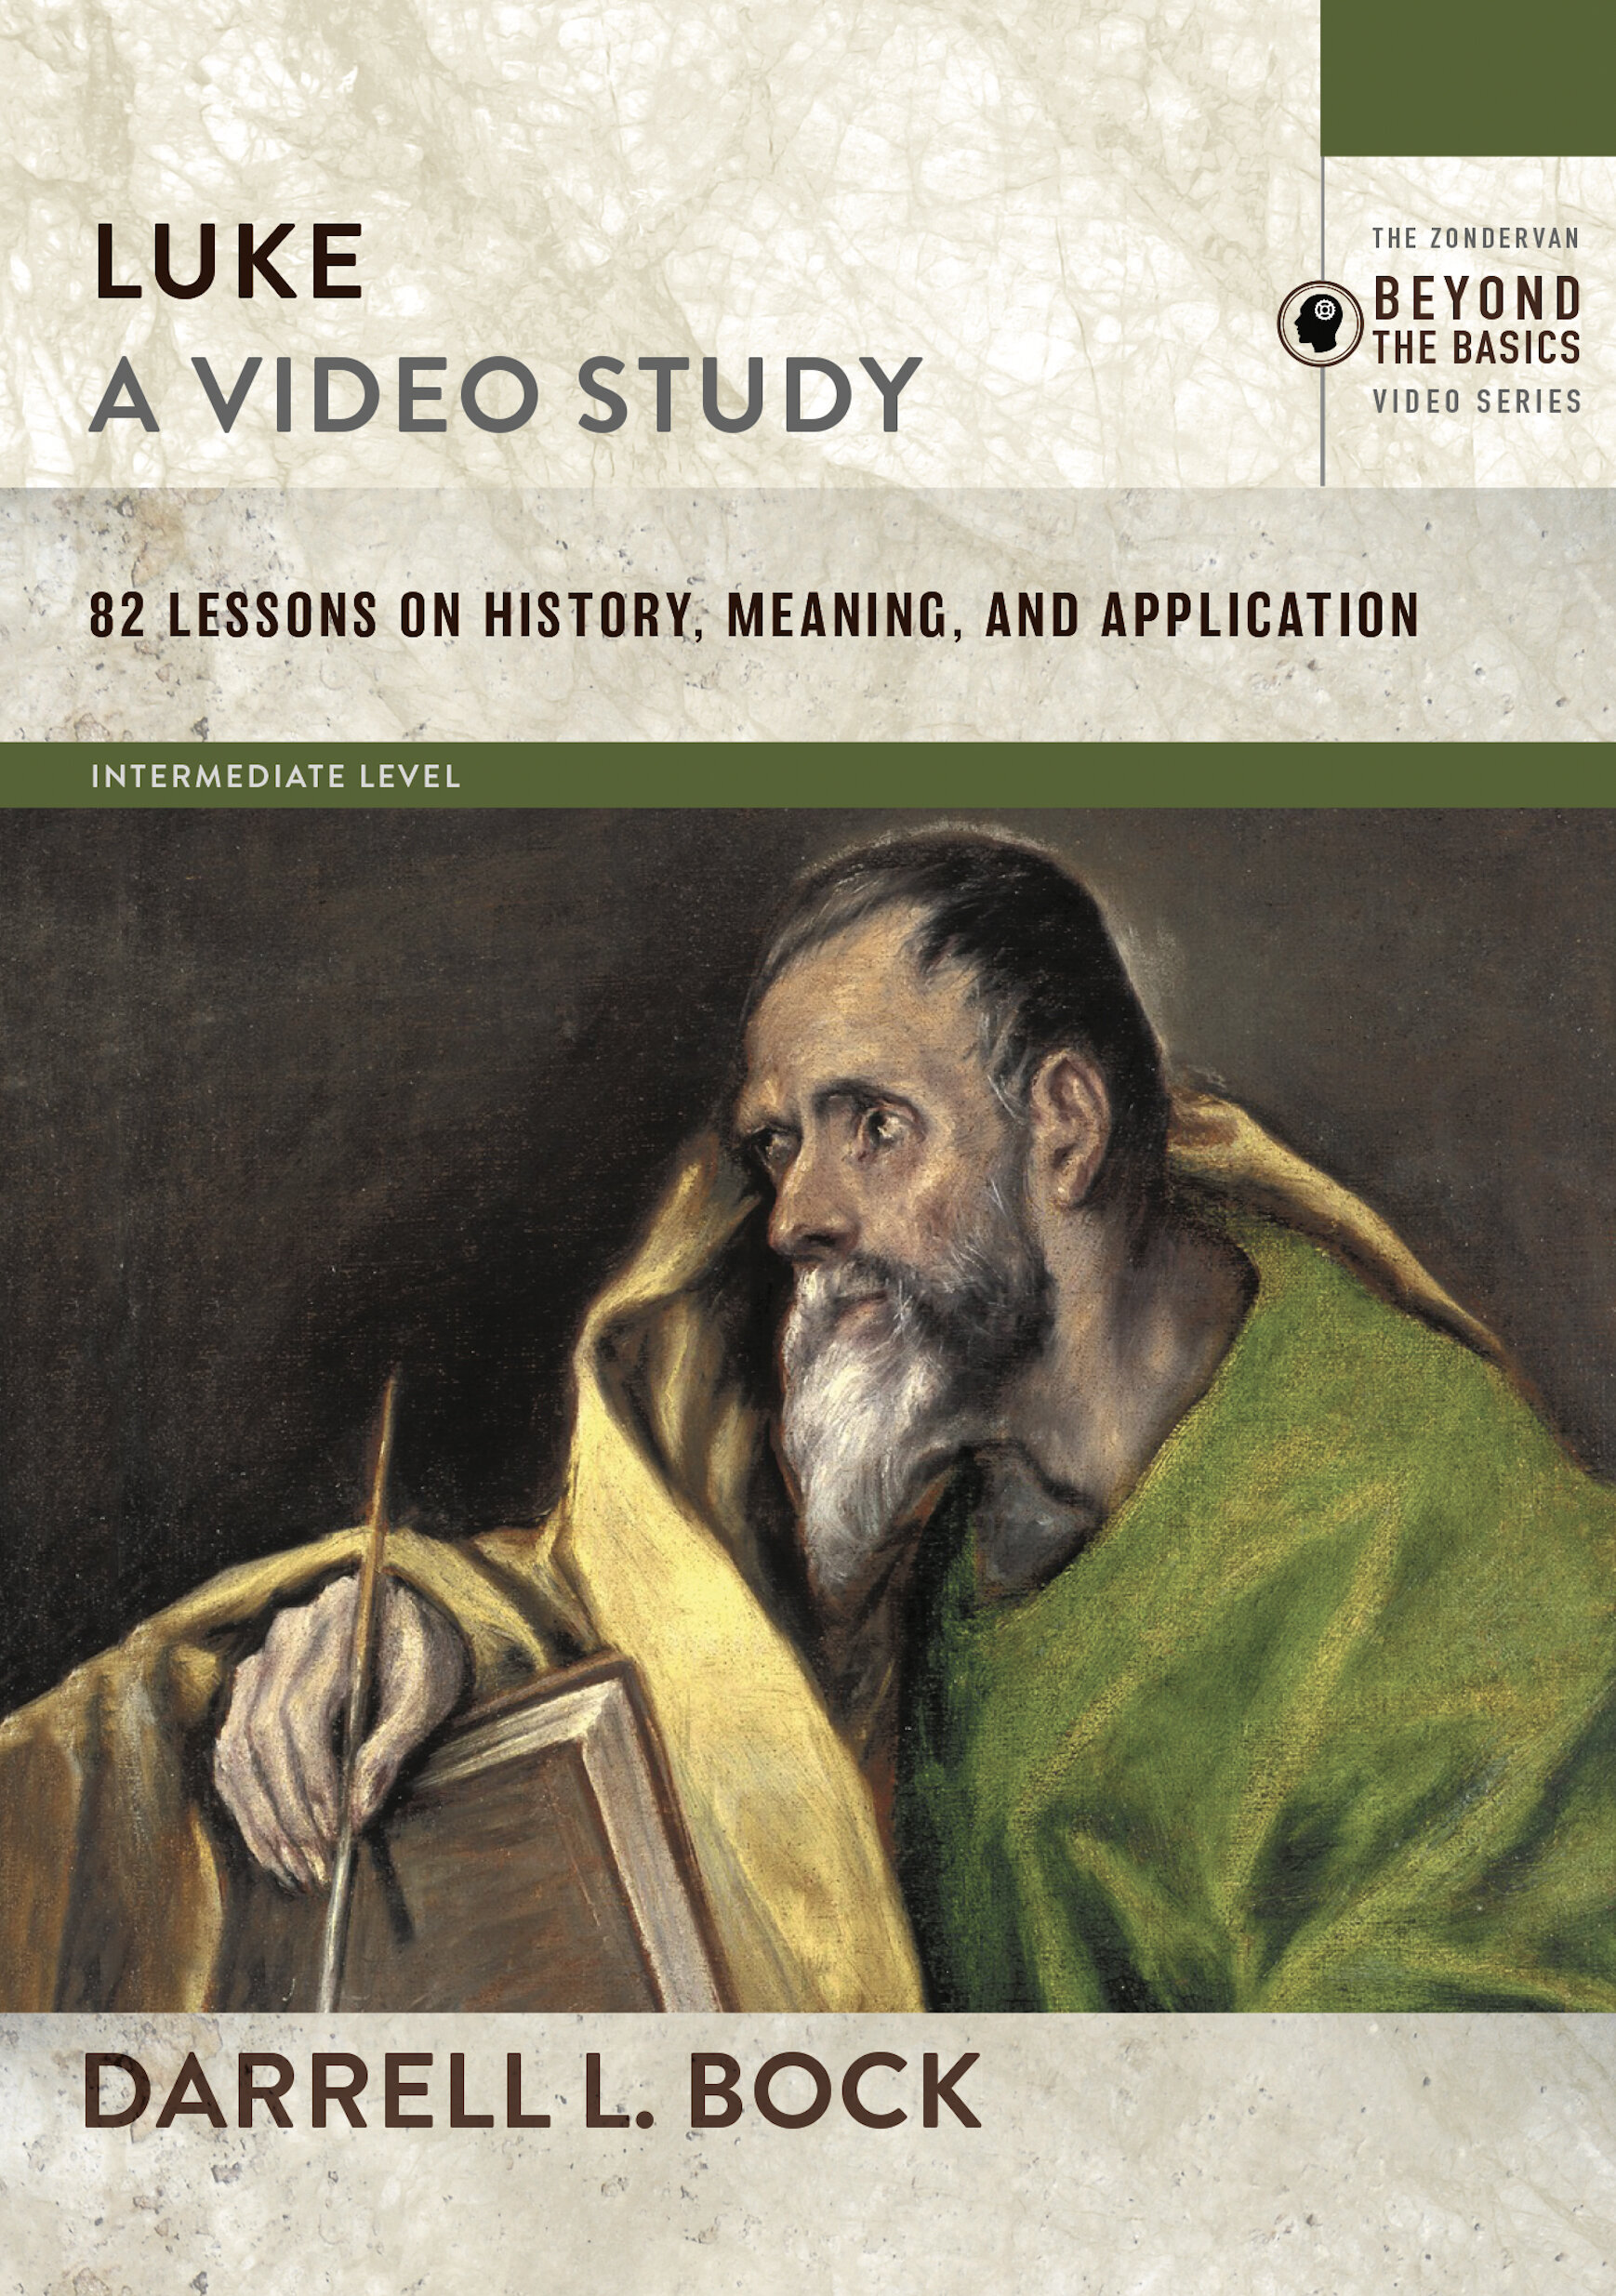 Luke, A Video Study: 82 Lessons on History, Meaning, and Application (Beyond The Basics Video Series)